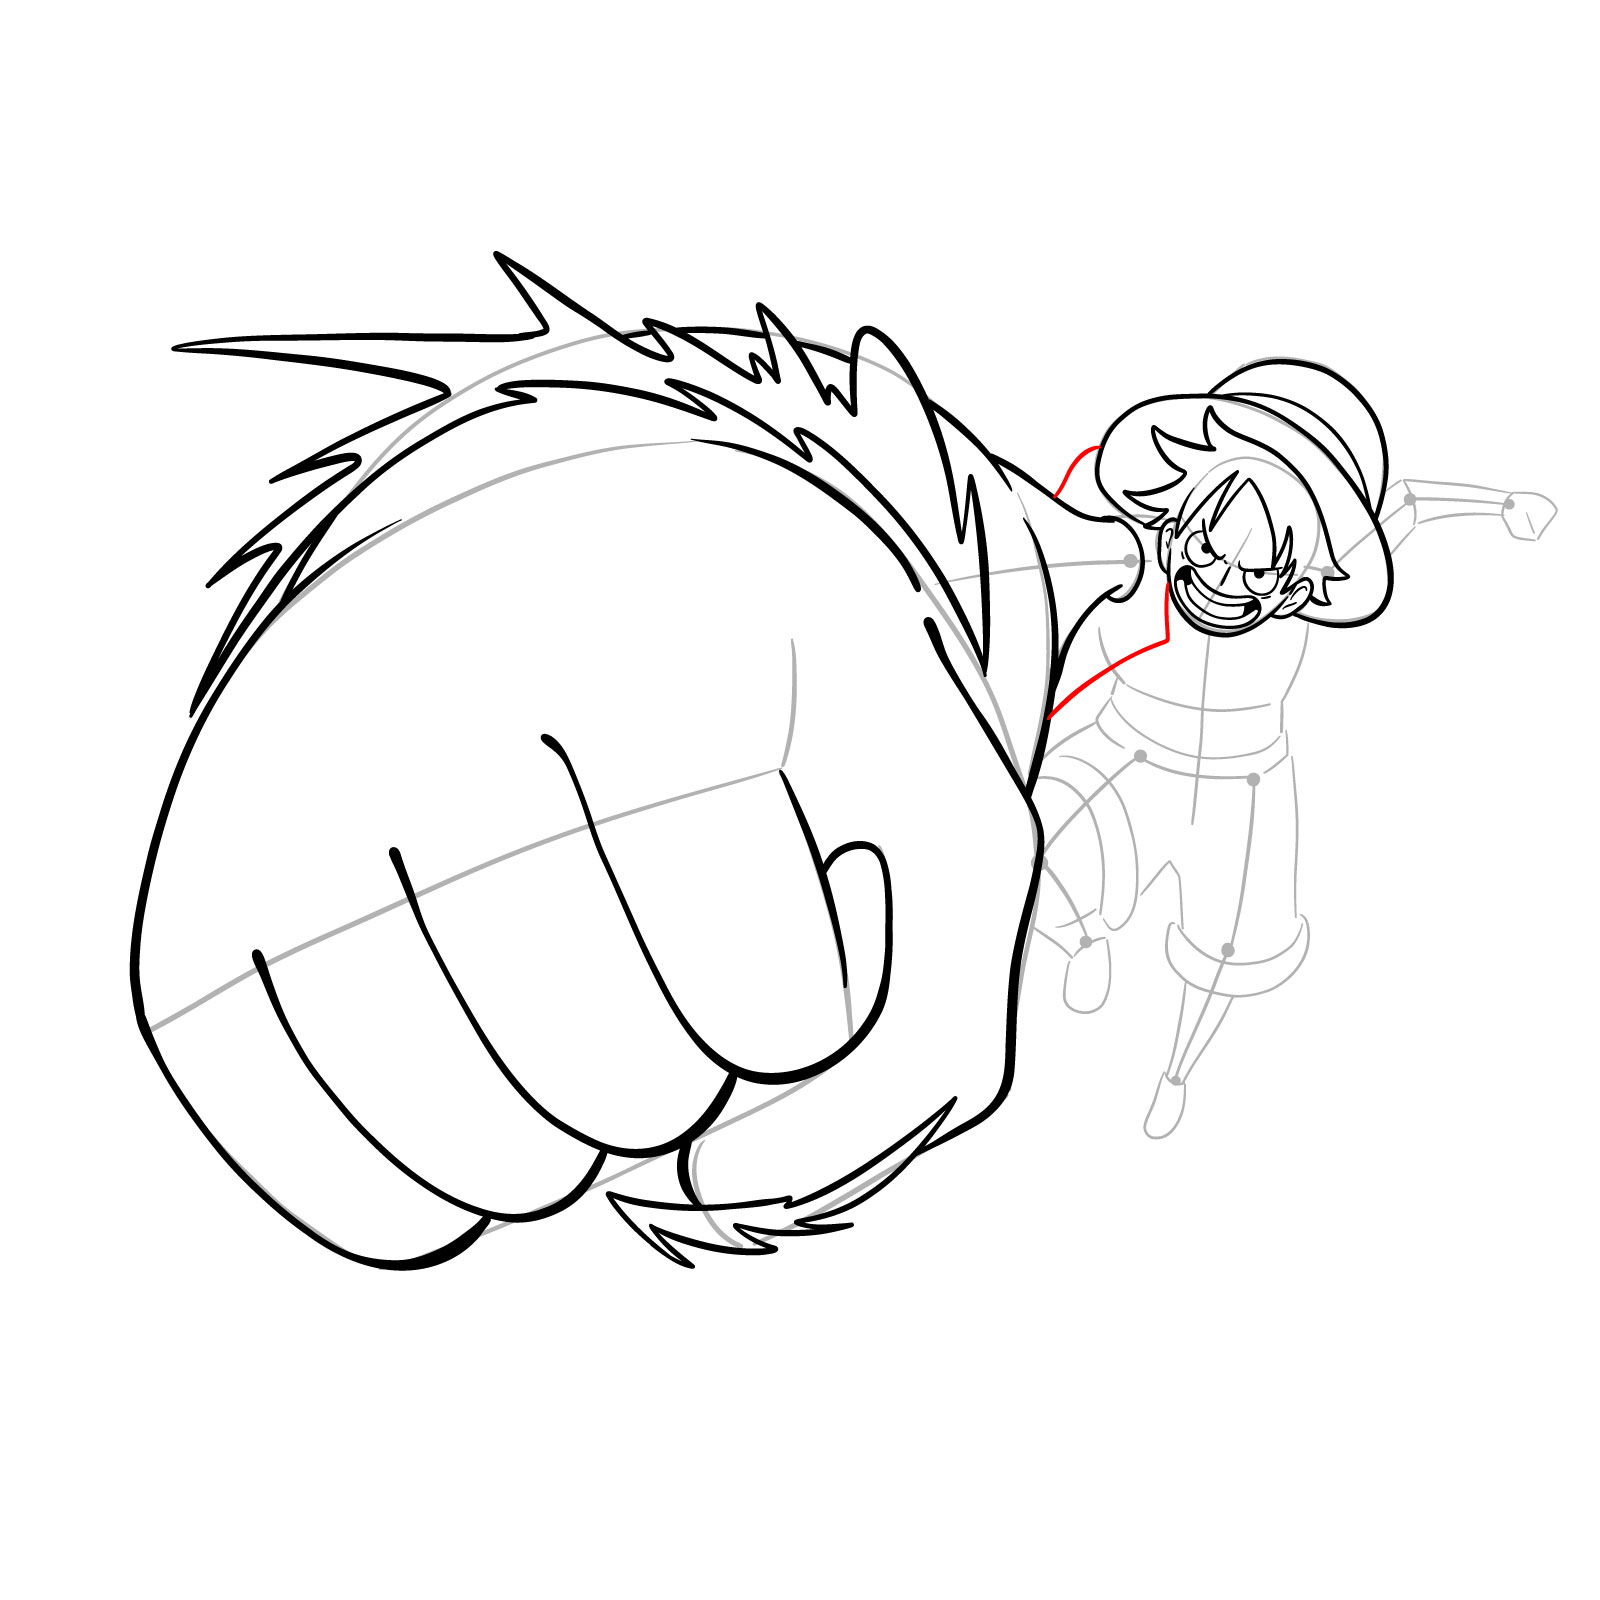 How to draw Luffy's Gear 3 without haki - step 24